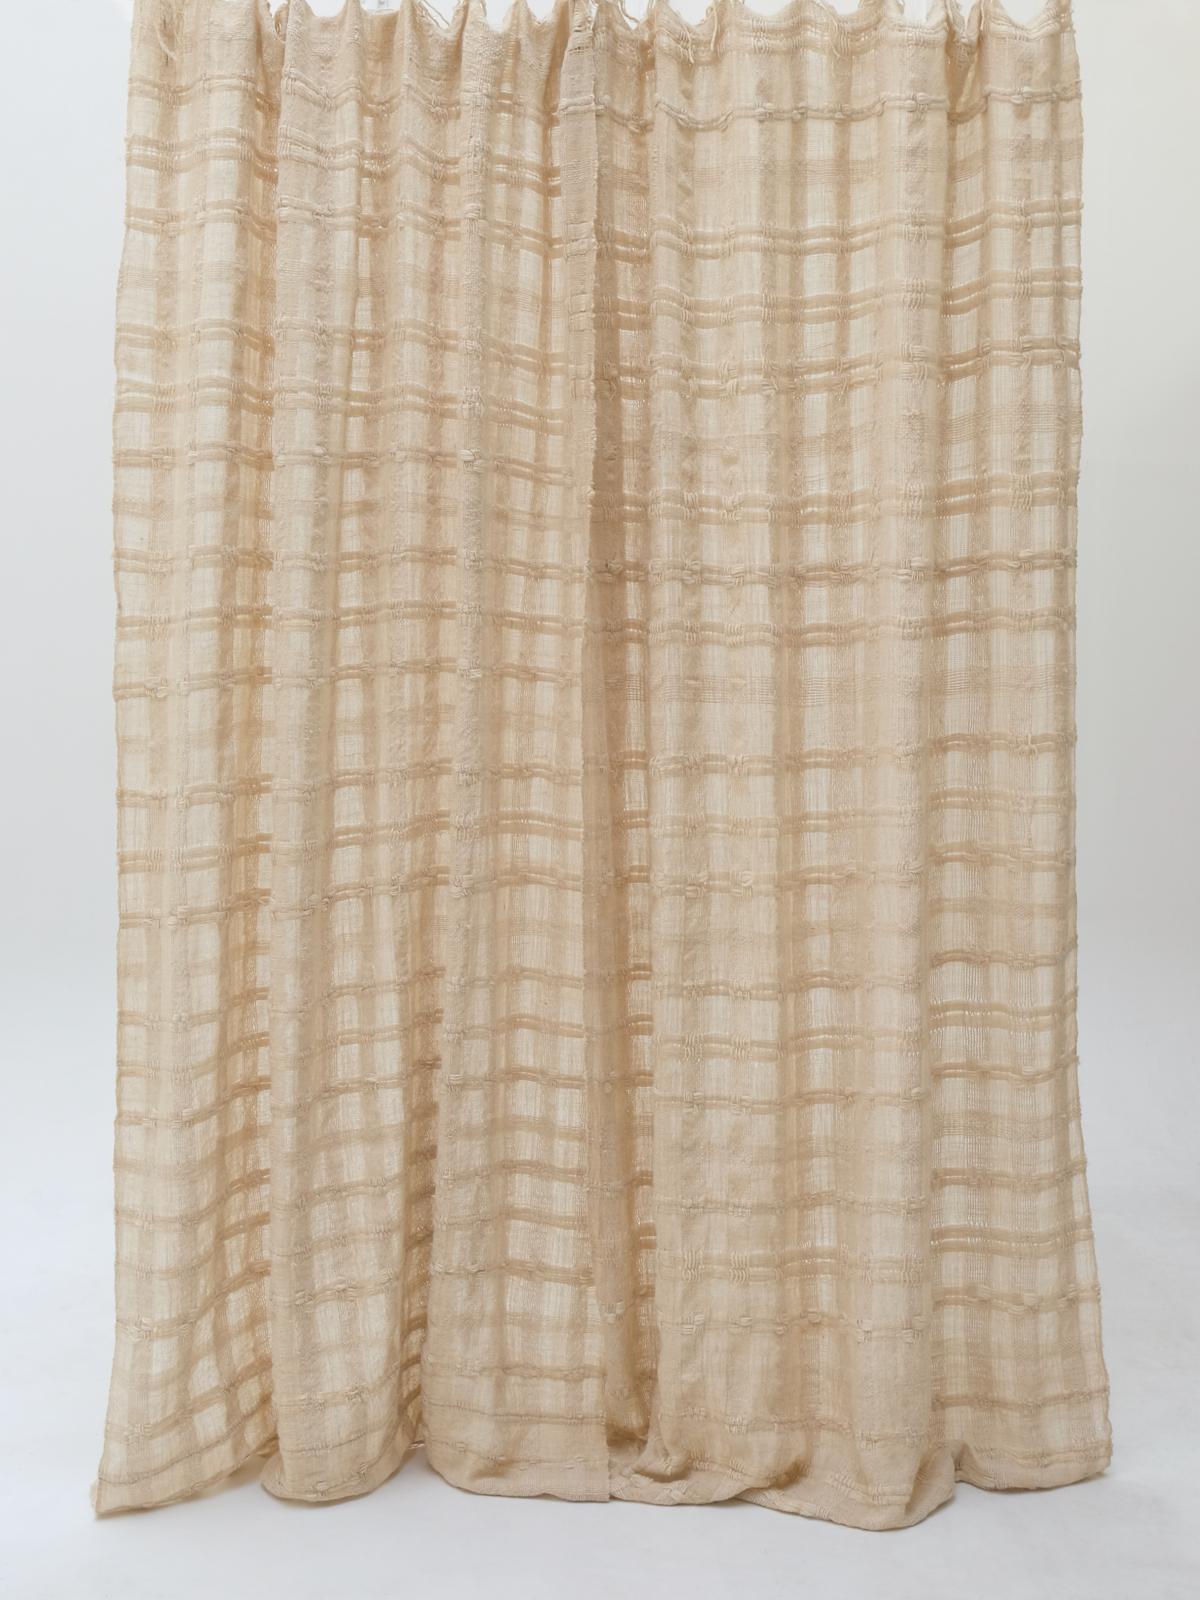 Curtains Made of handspun and handwoven local Wool For Sale 3